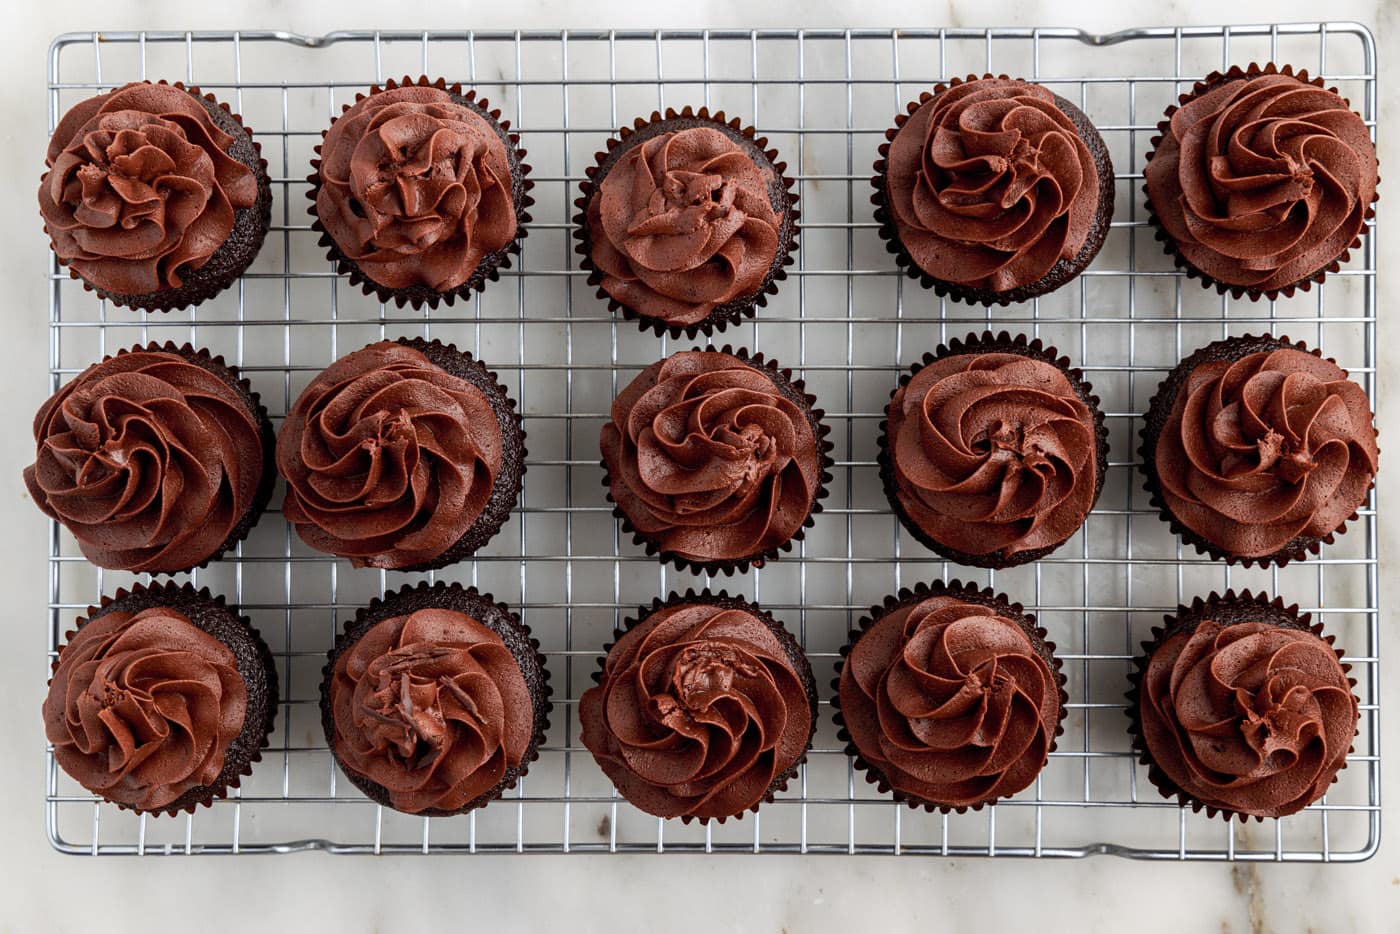 chocolate fudge frosting on top of chocolate cupcakes